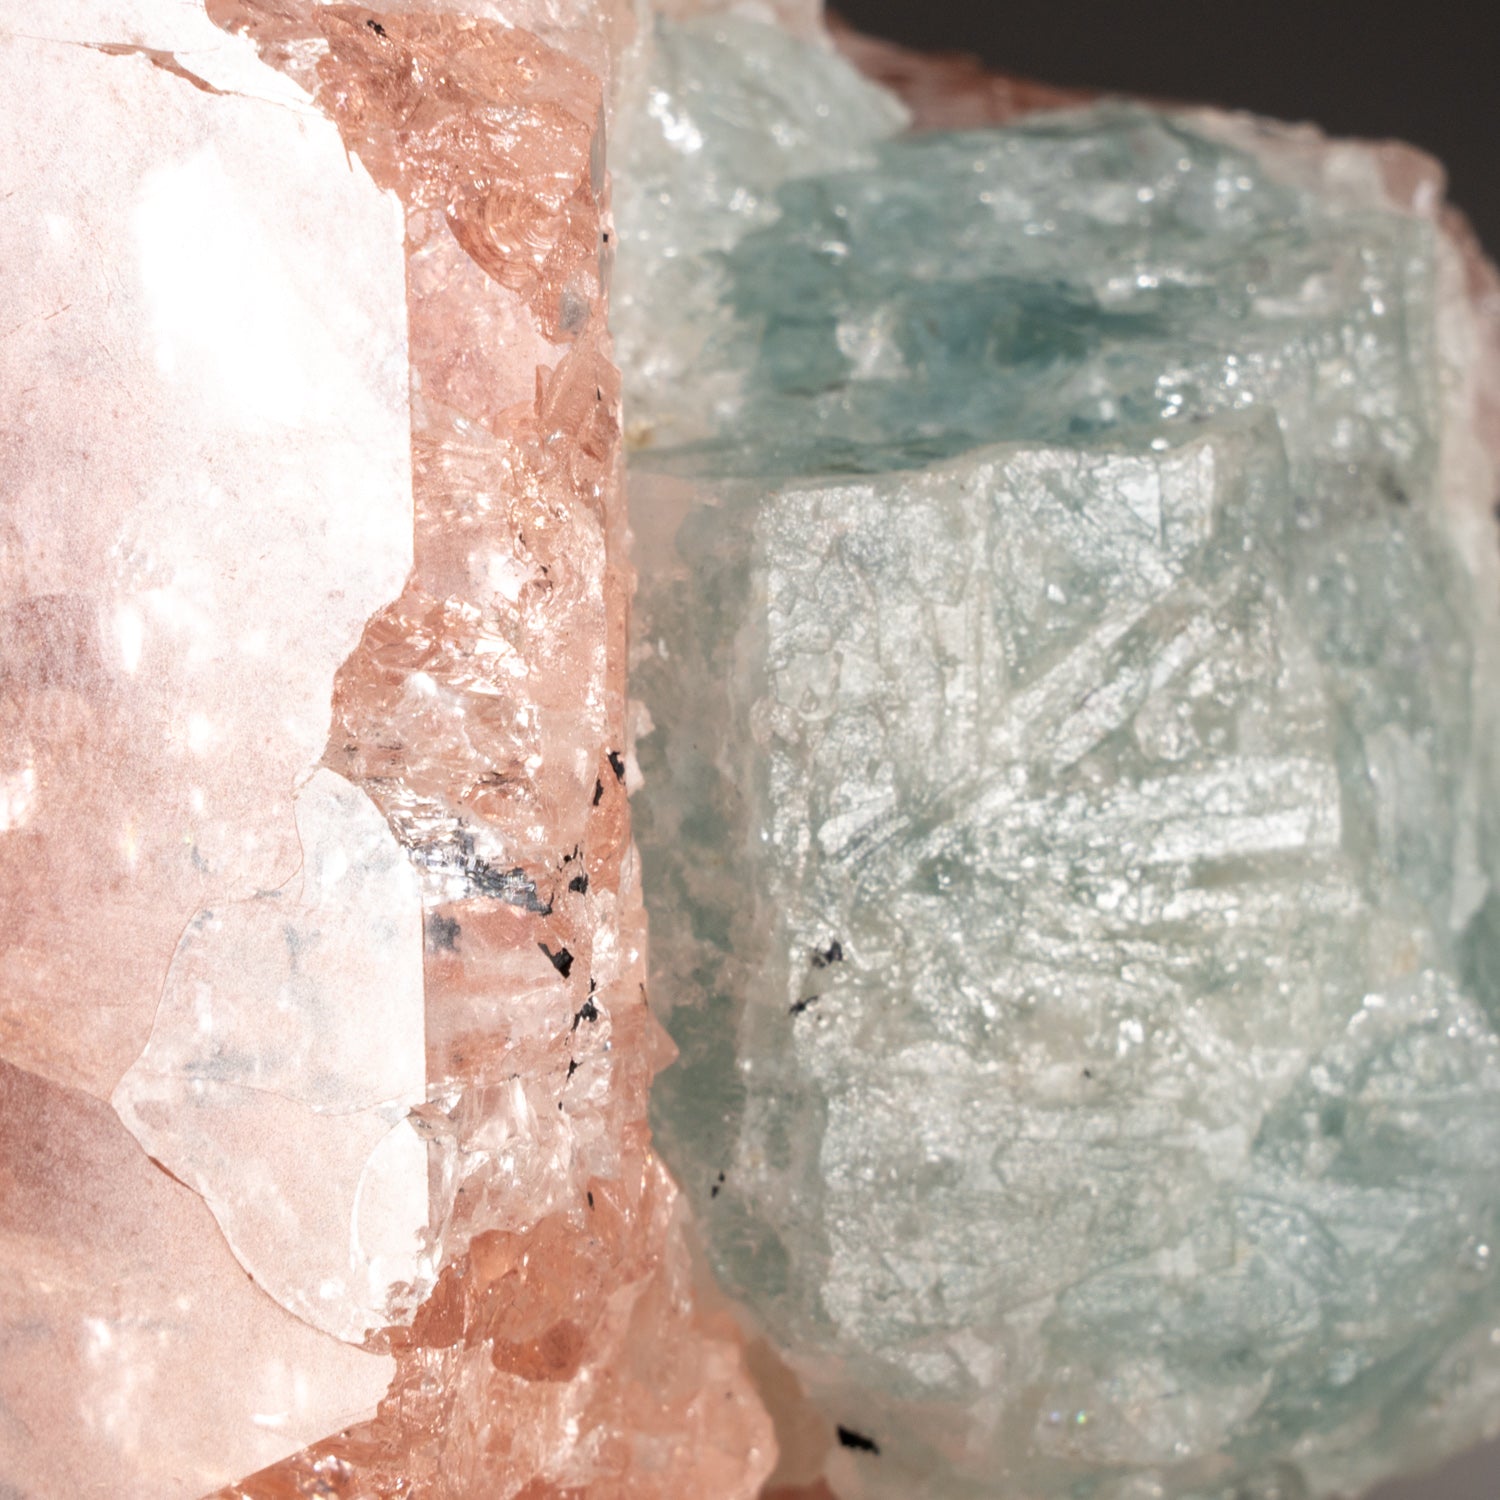 Morganite and Aquamarine From Mawi Pegmatite, Nuristan Province, Afghanistan